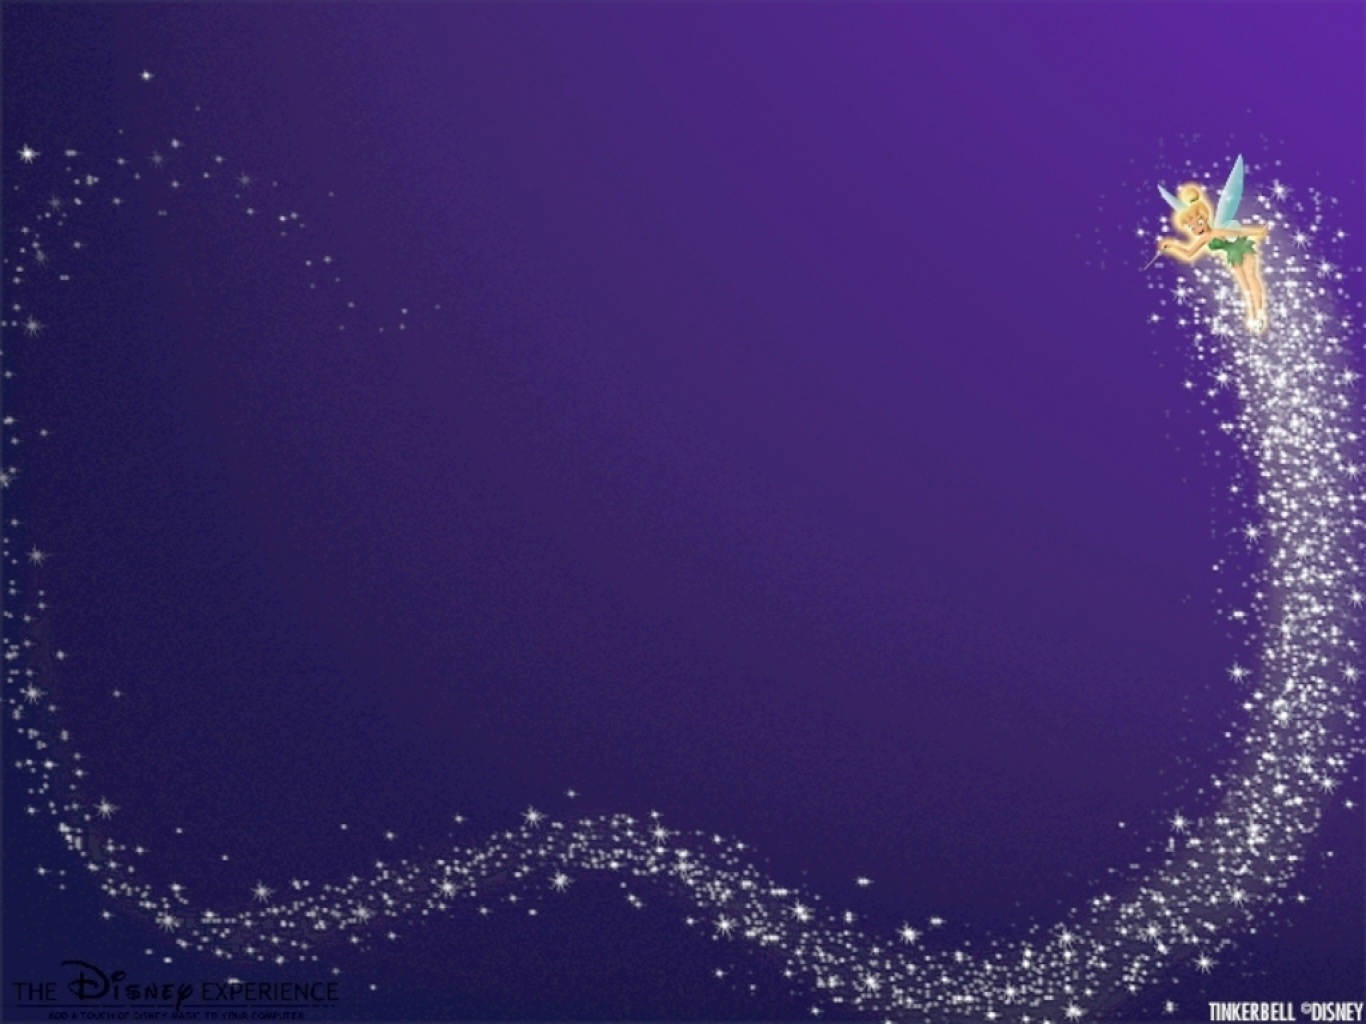 Free download Wallpaper download flash Tinkerbell with fairy dust [1366x1024] for your Desktop, Mobile & Tablet. Explore Free Tinkerbell Wallpaper Downloads. Tinkerbell Picture Wallpaper, Disney Tinkerbell Wallpaper, Free Tinkerbell Wallpaper